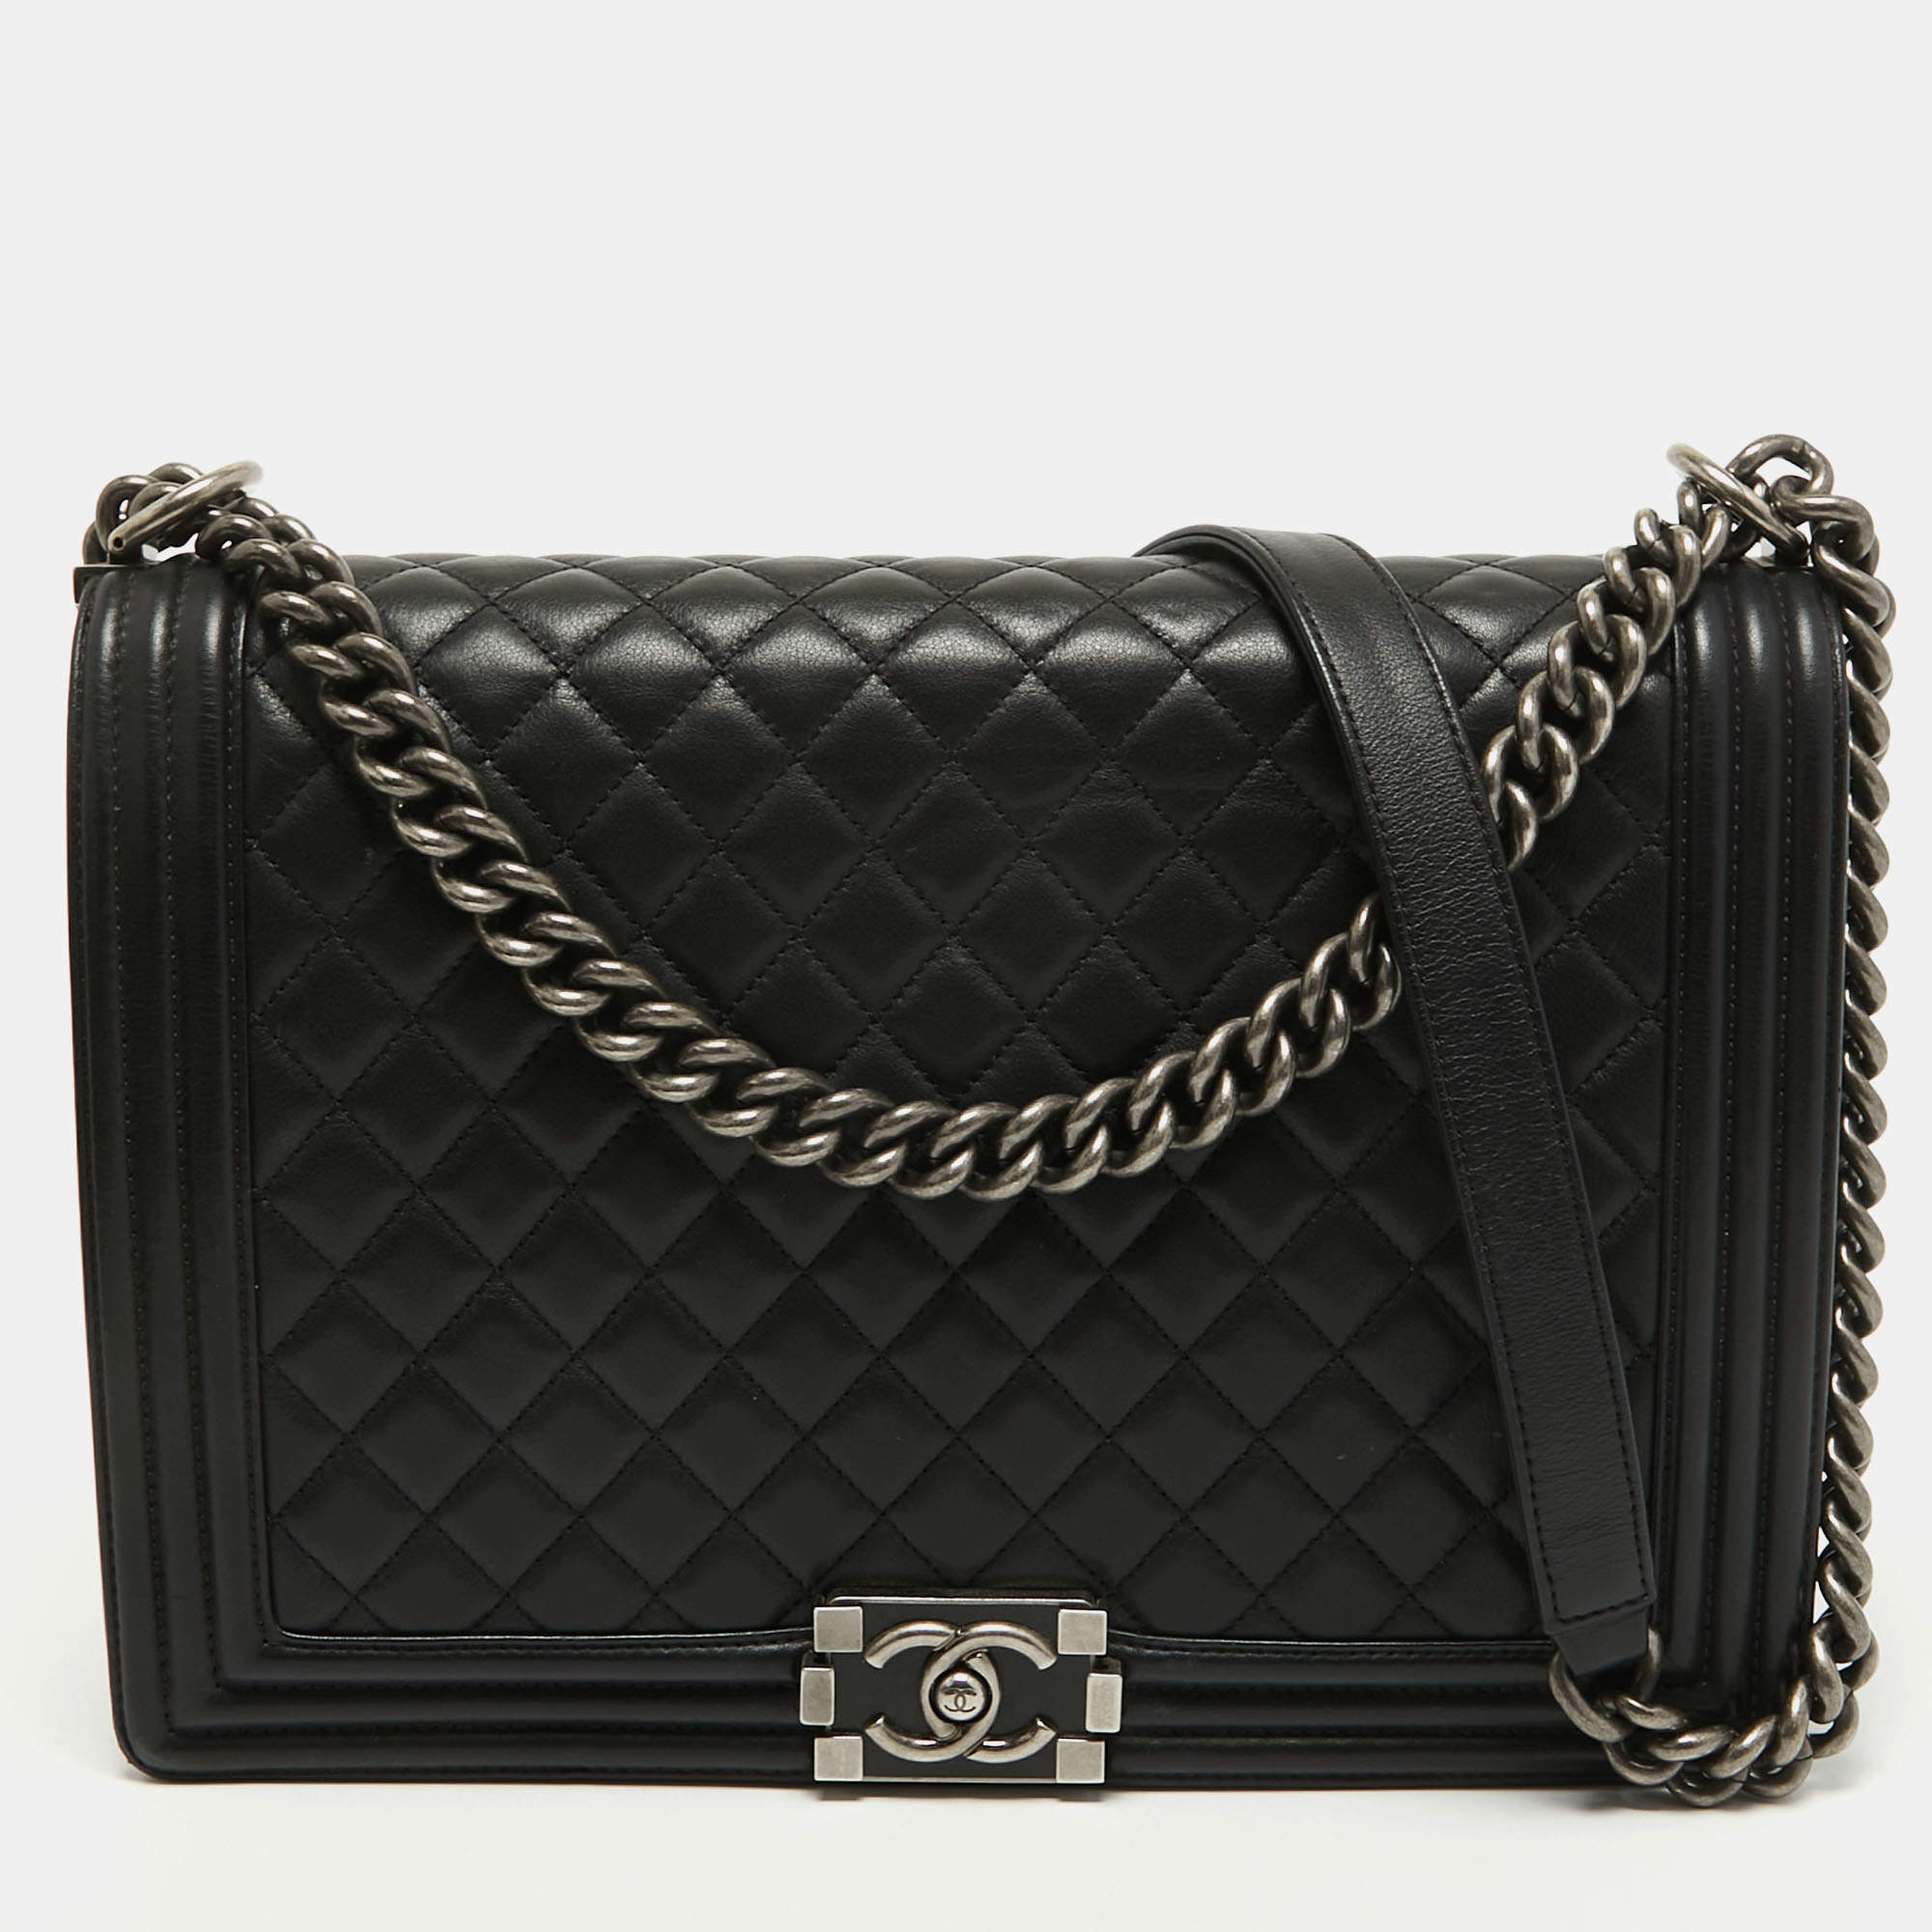 Chanel Black Pleated Leather Oversized Classic Flap Bag Chanel